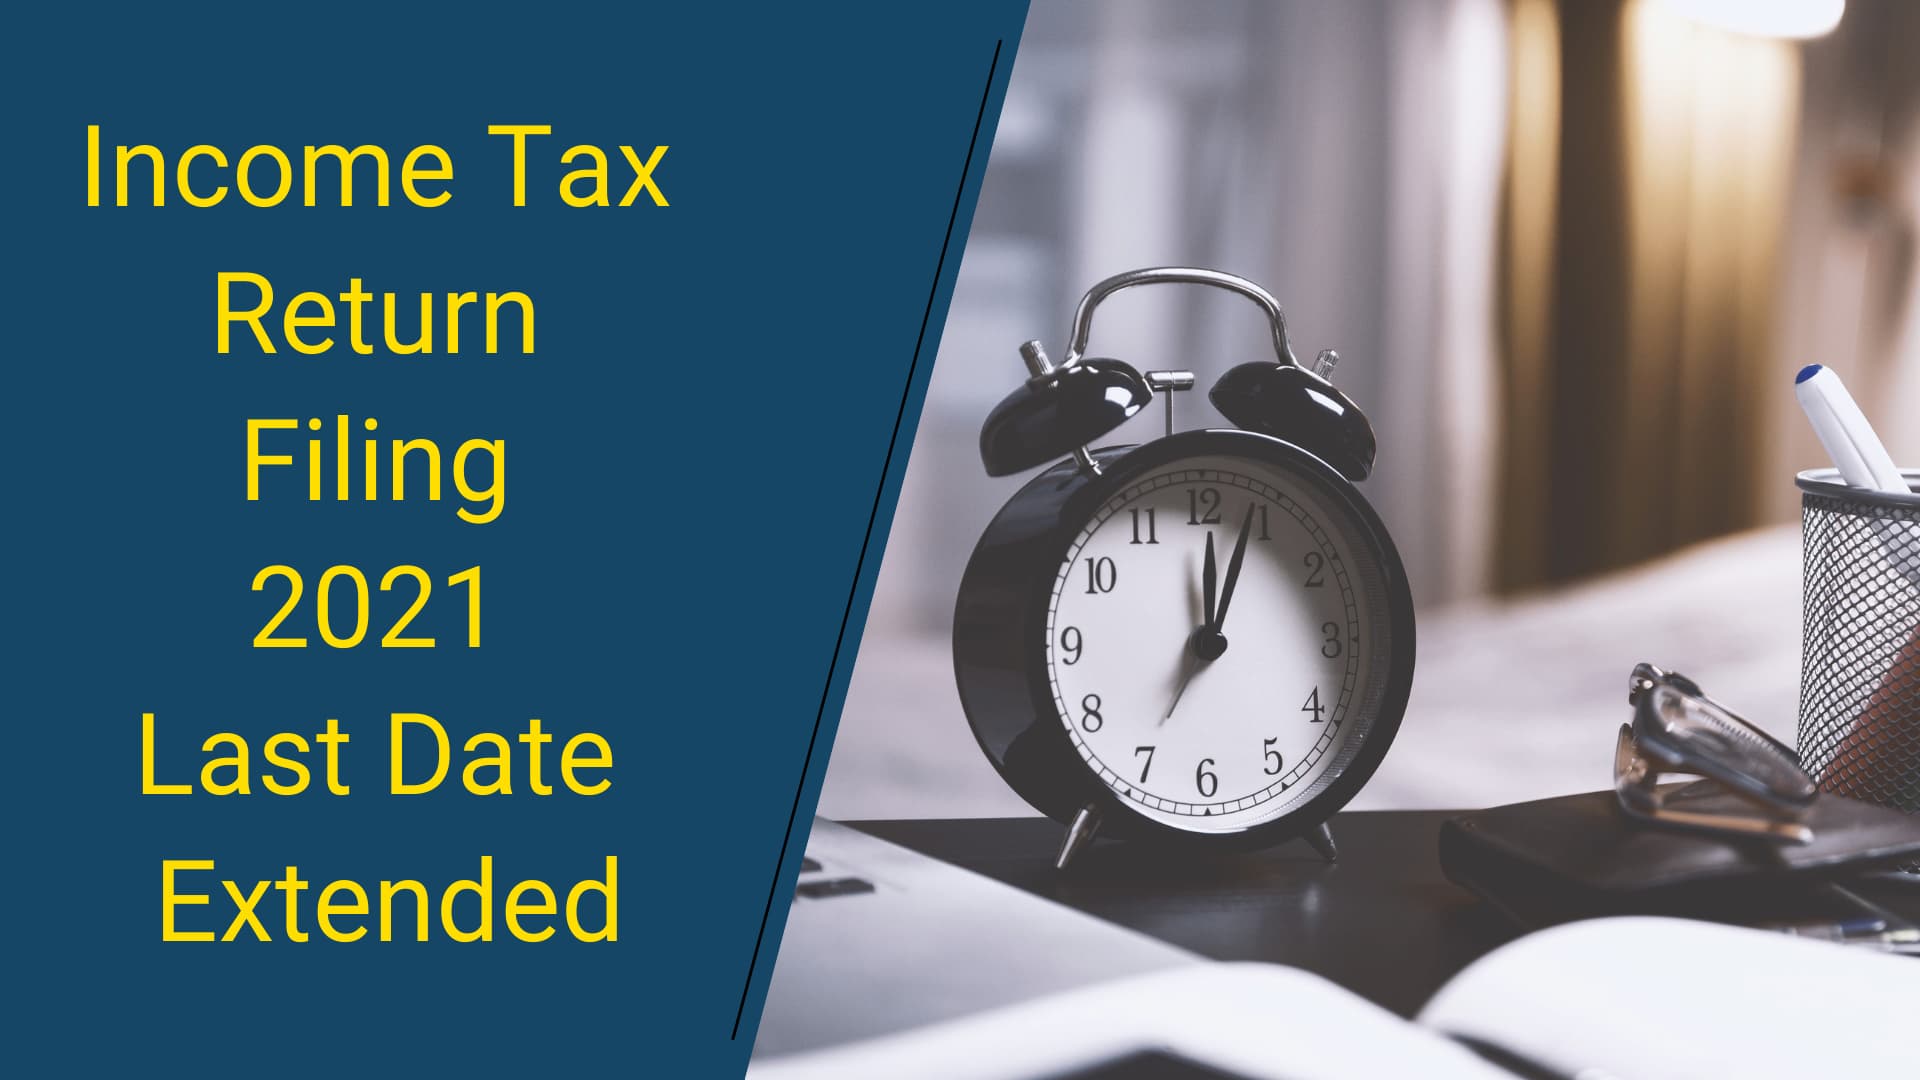 Income Tax Return Filing 2021 Last Date Extended